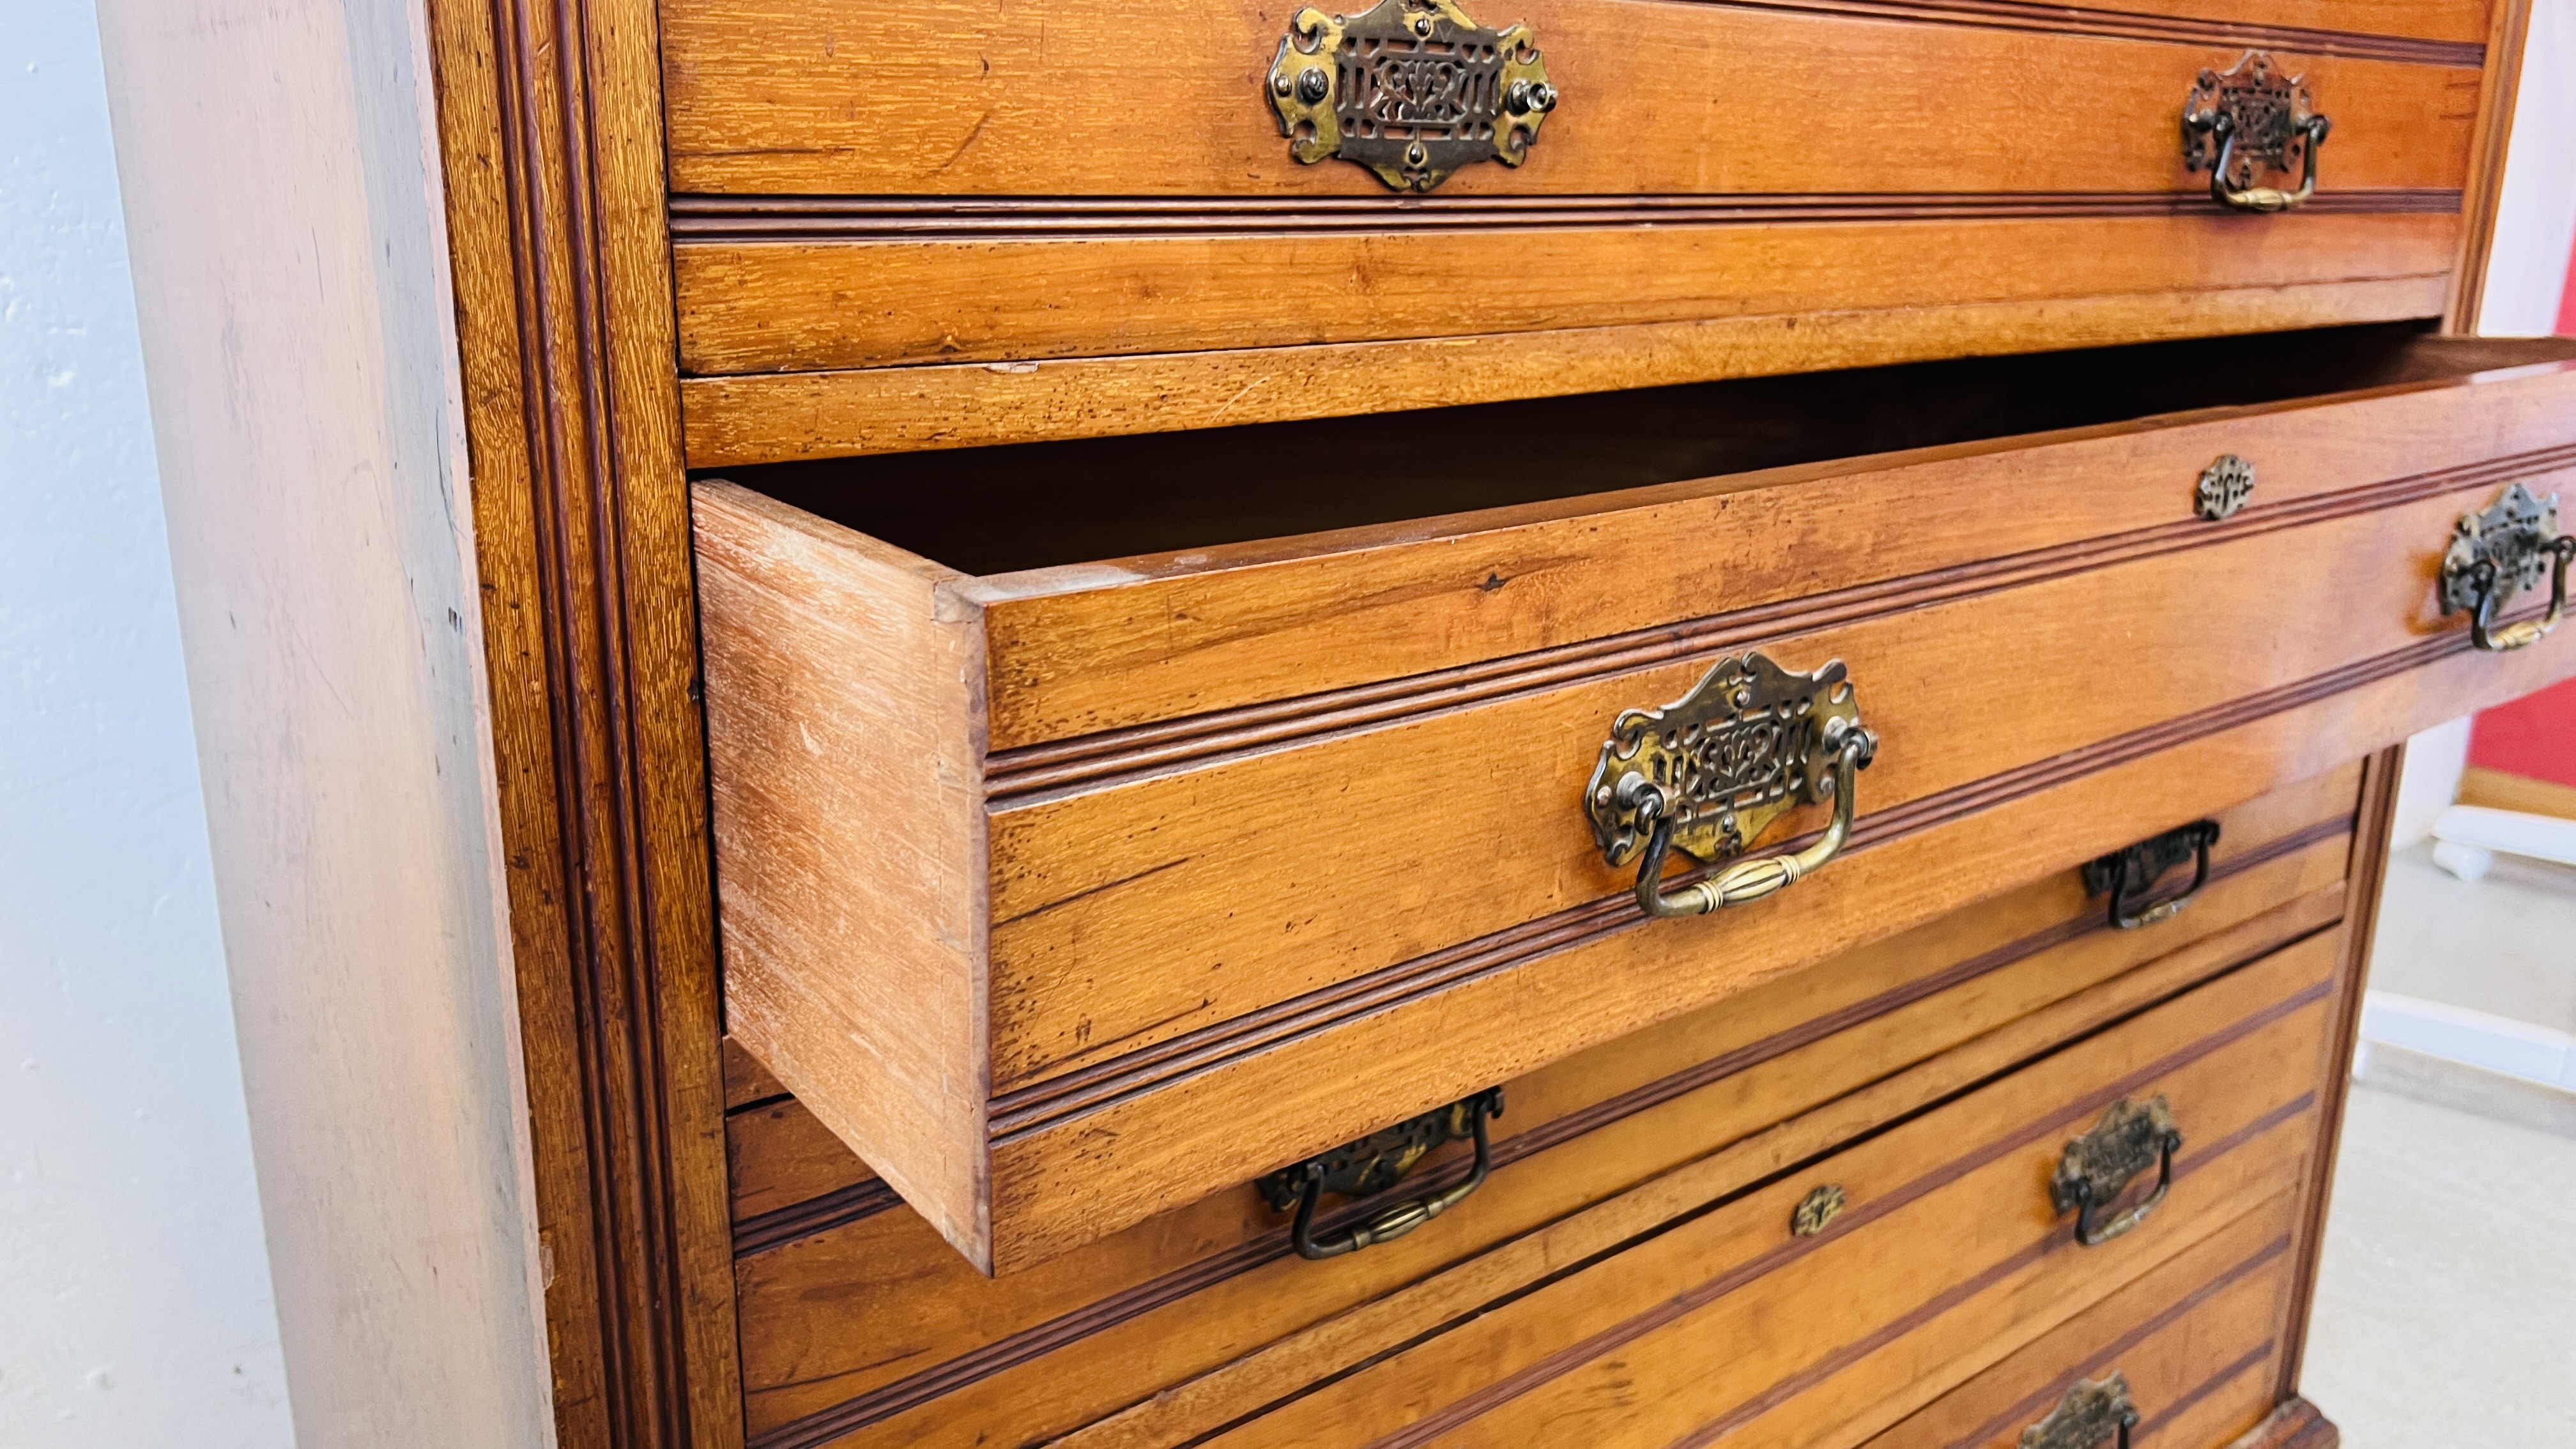 AN EDWARDIAN AMERICAN WALNUT 6 DRAWER CHEST WITH BRASS PLATE HANDLES W 112CM. D 46CM. H 118CM. - Image 14 of 14